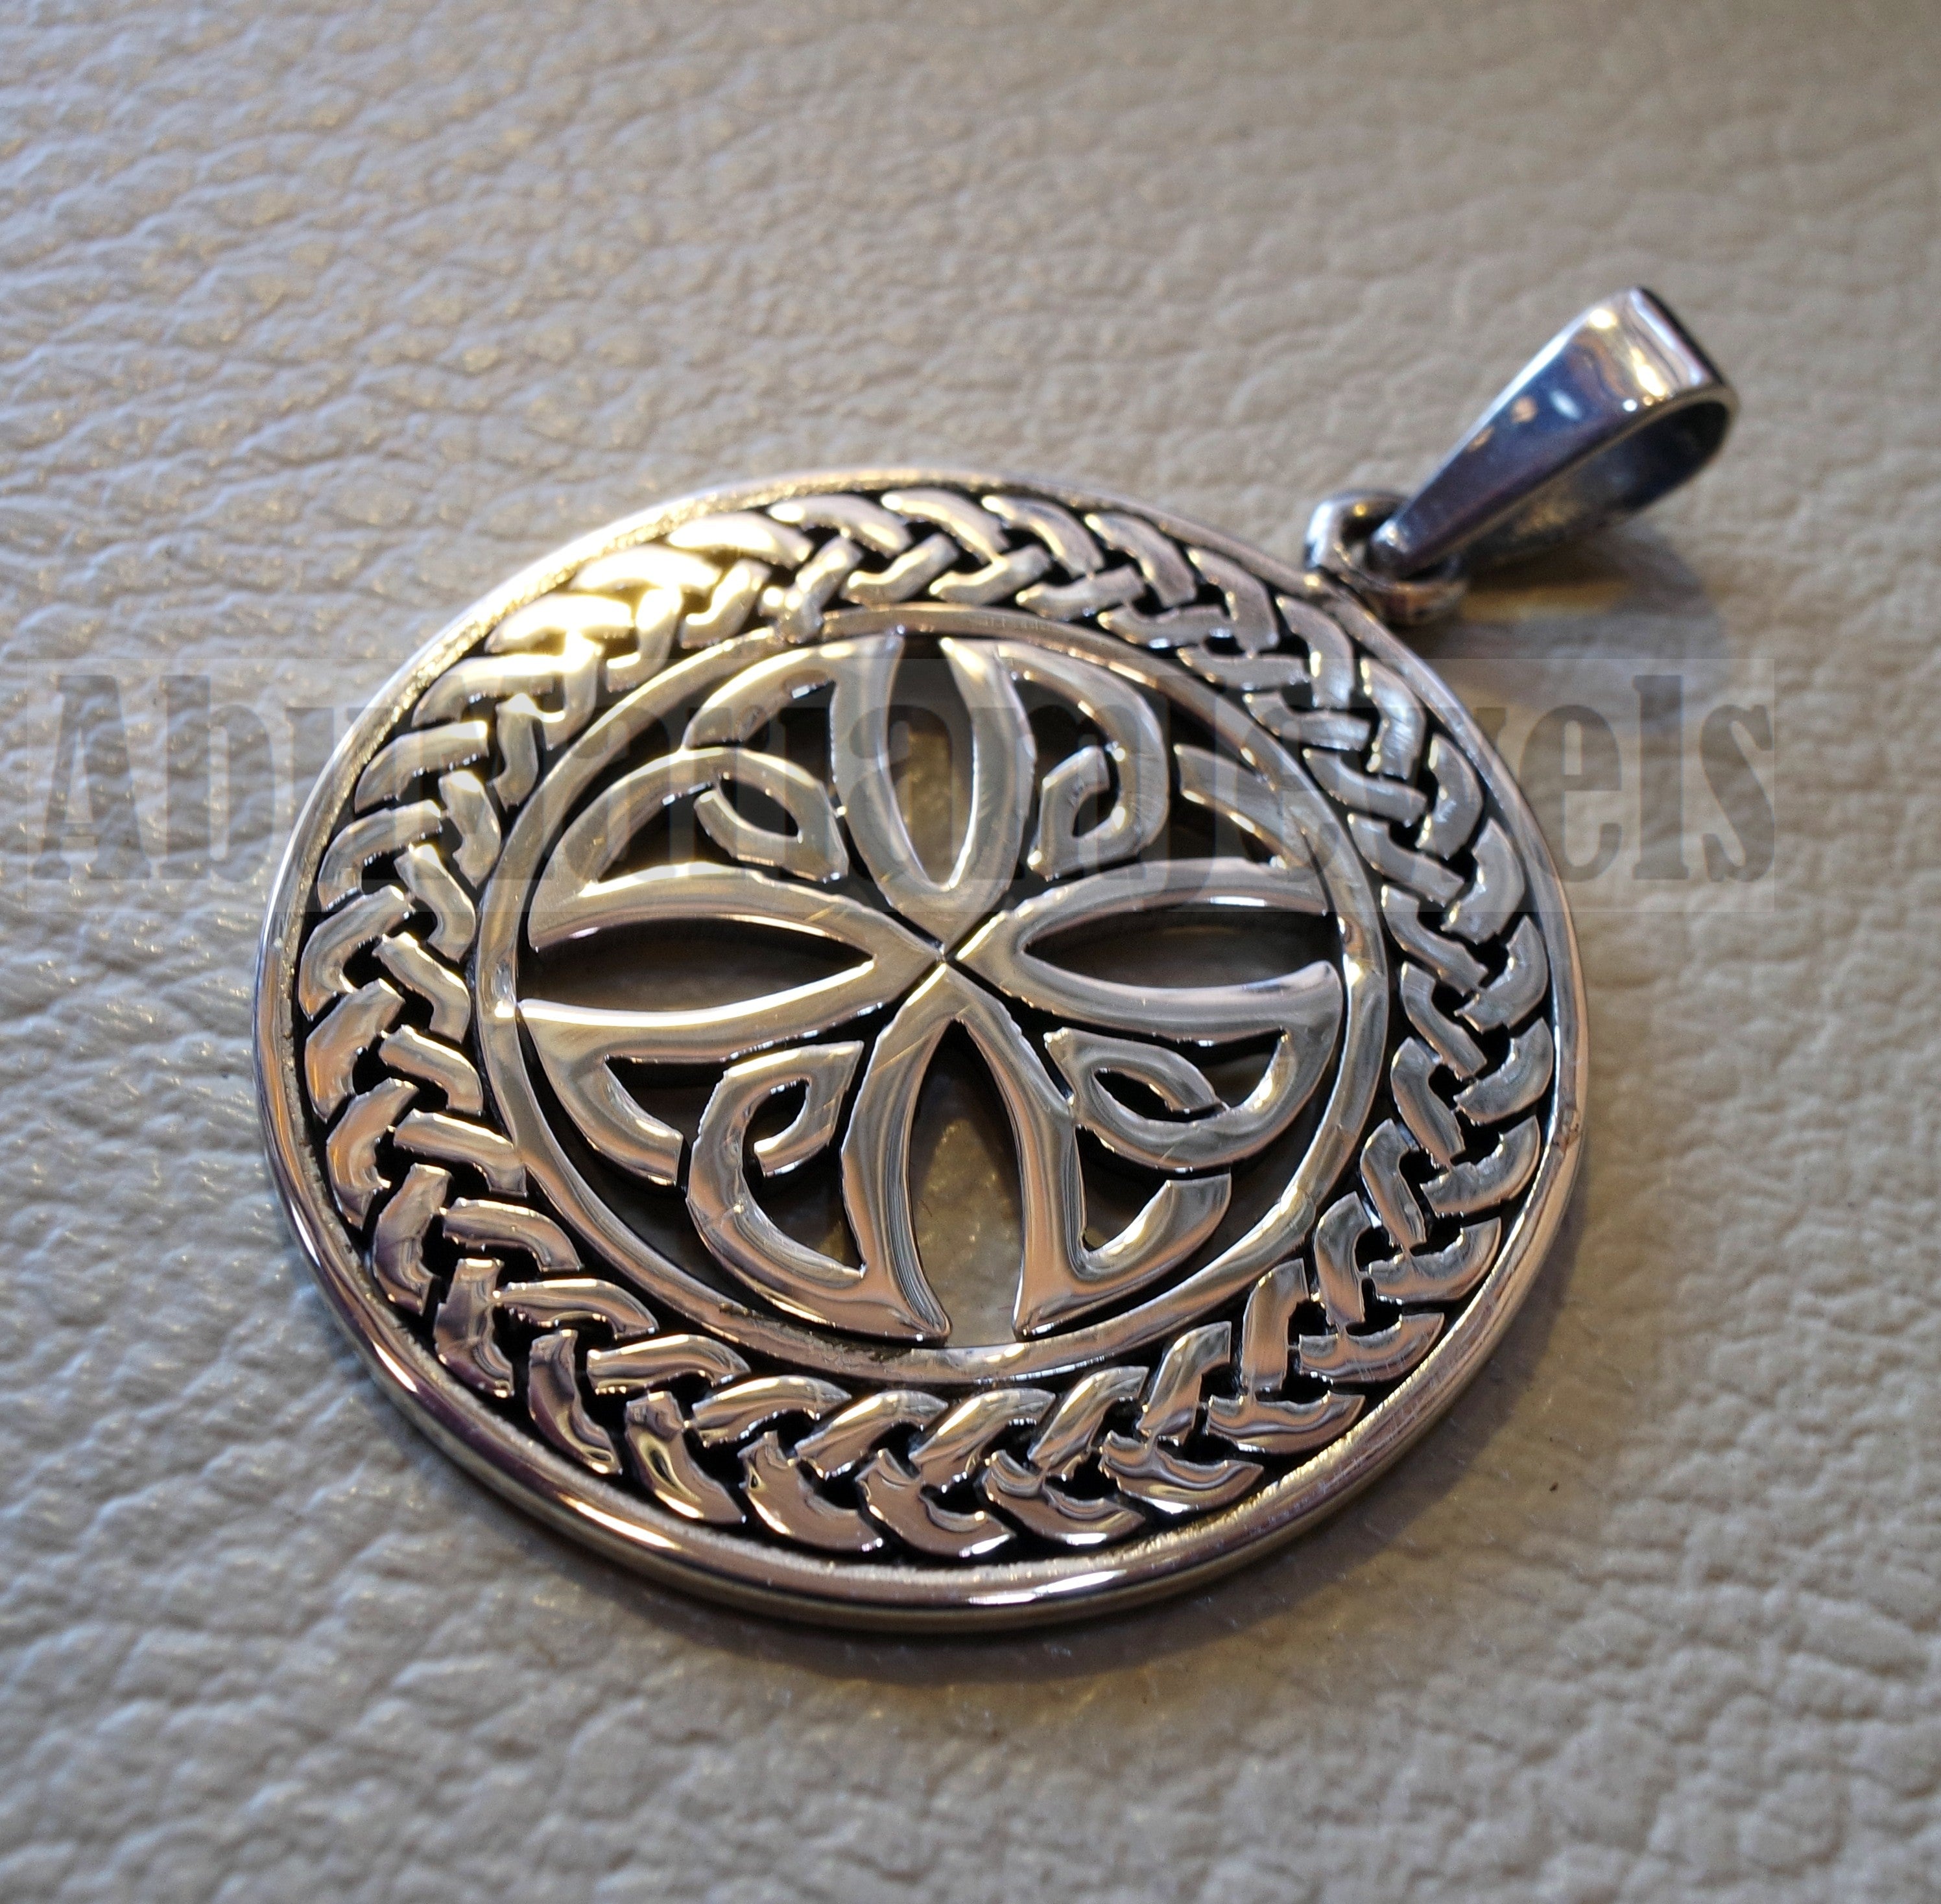 Celtic round cross pendant sterling silver 925 jewelry christianity vintage handmade heavy express shipping Christ religion